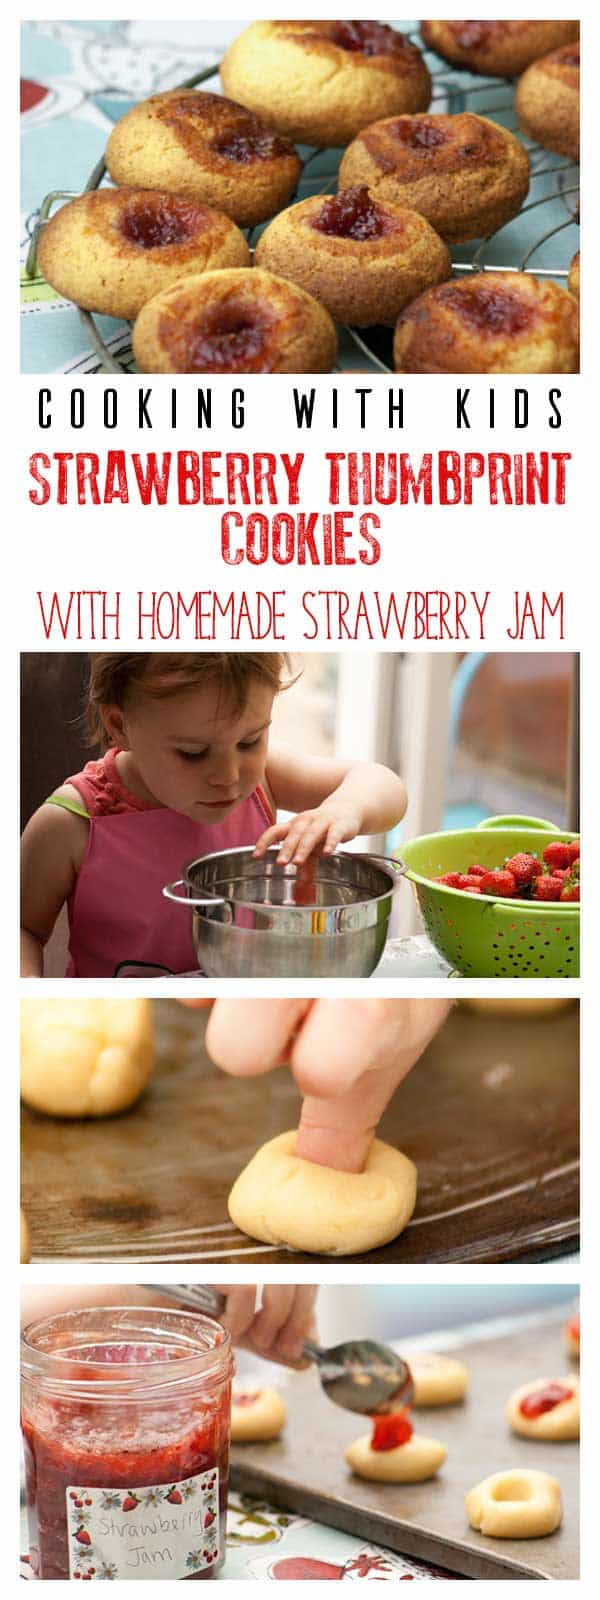 Make these delicious Strawberry Jam Thumbprint Cookies, the recipe includes a homemade strawberry Jam that is so easy to make kids can make it too.